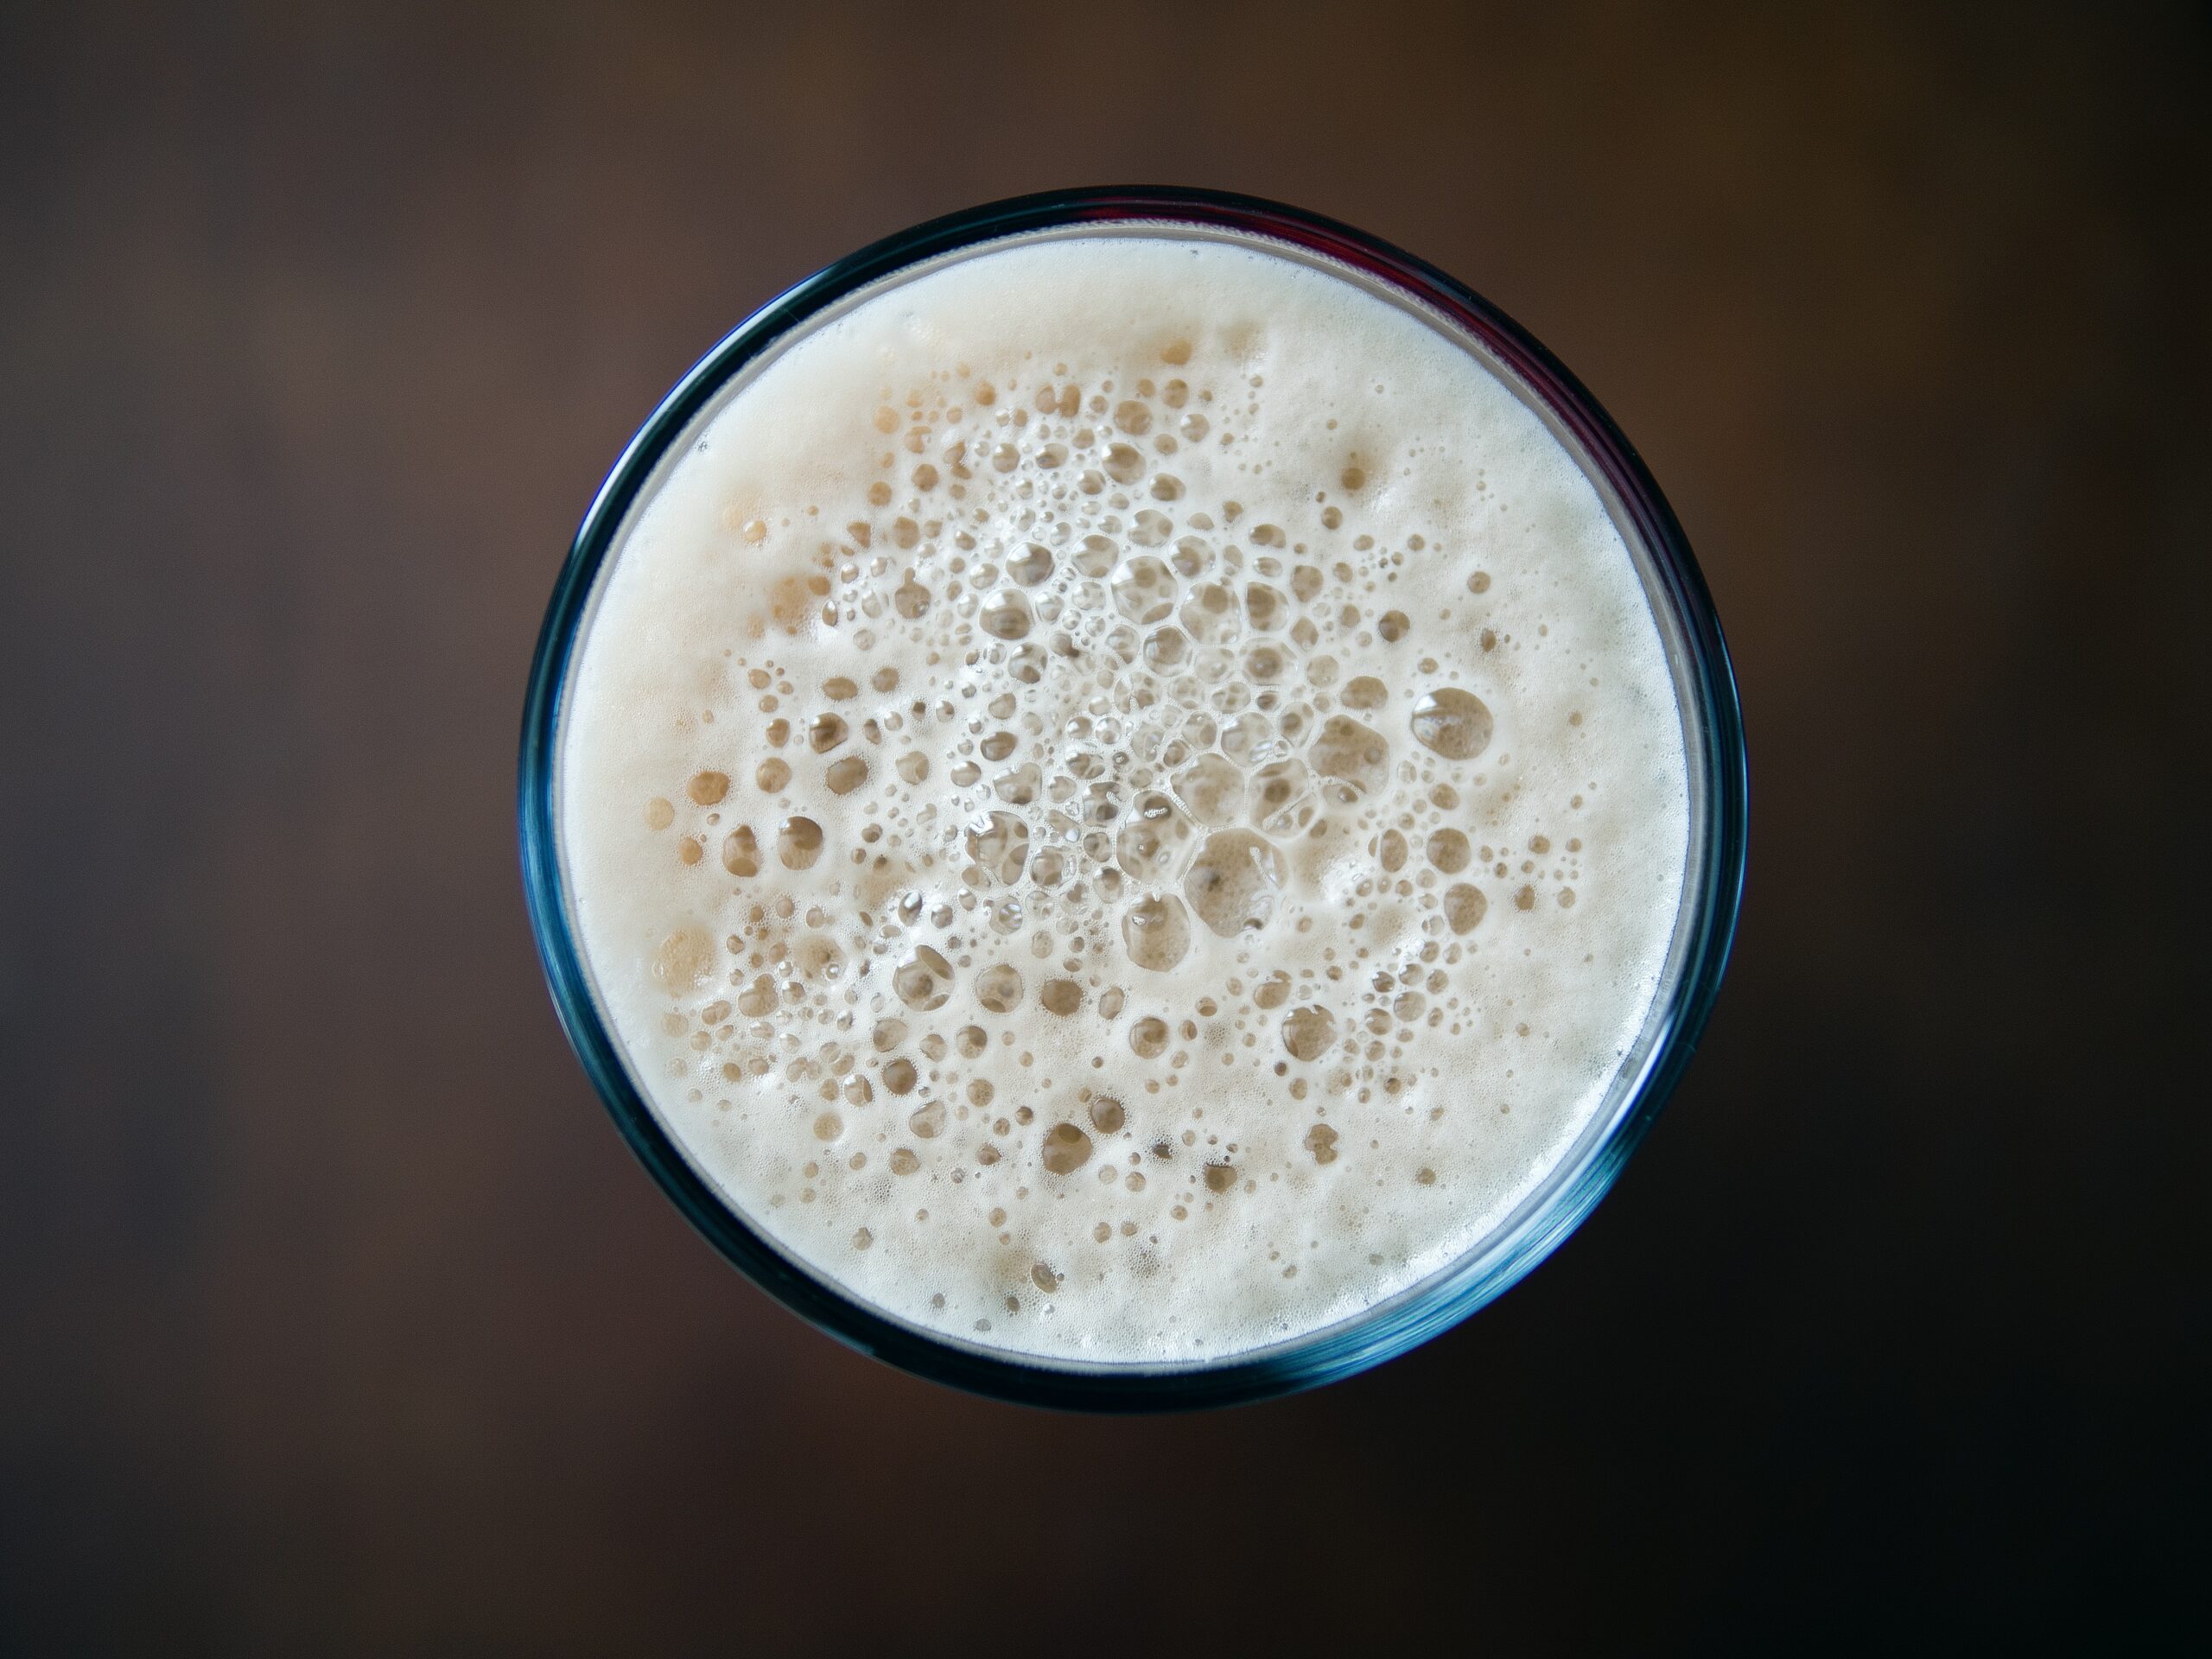 A glass of beer with foam